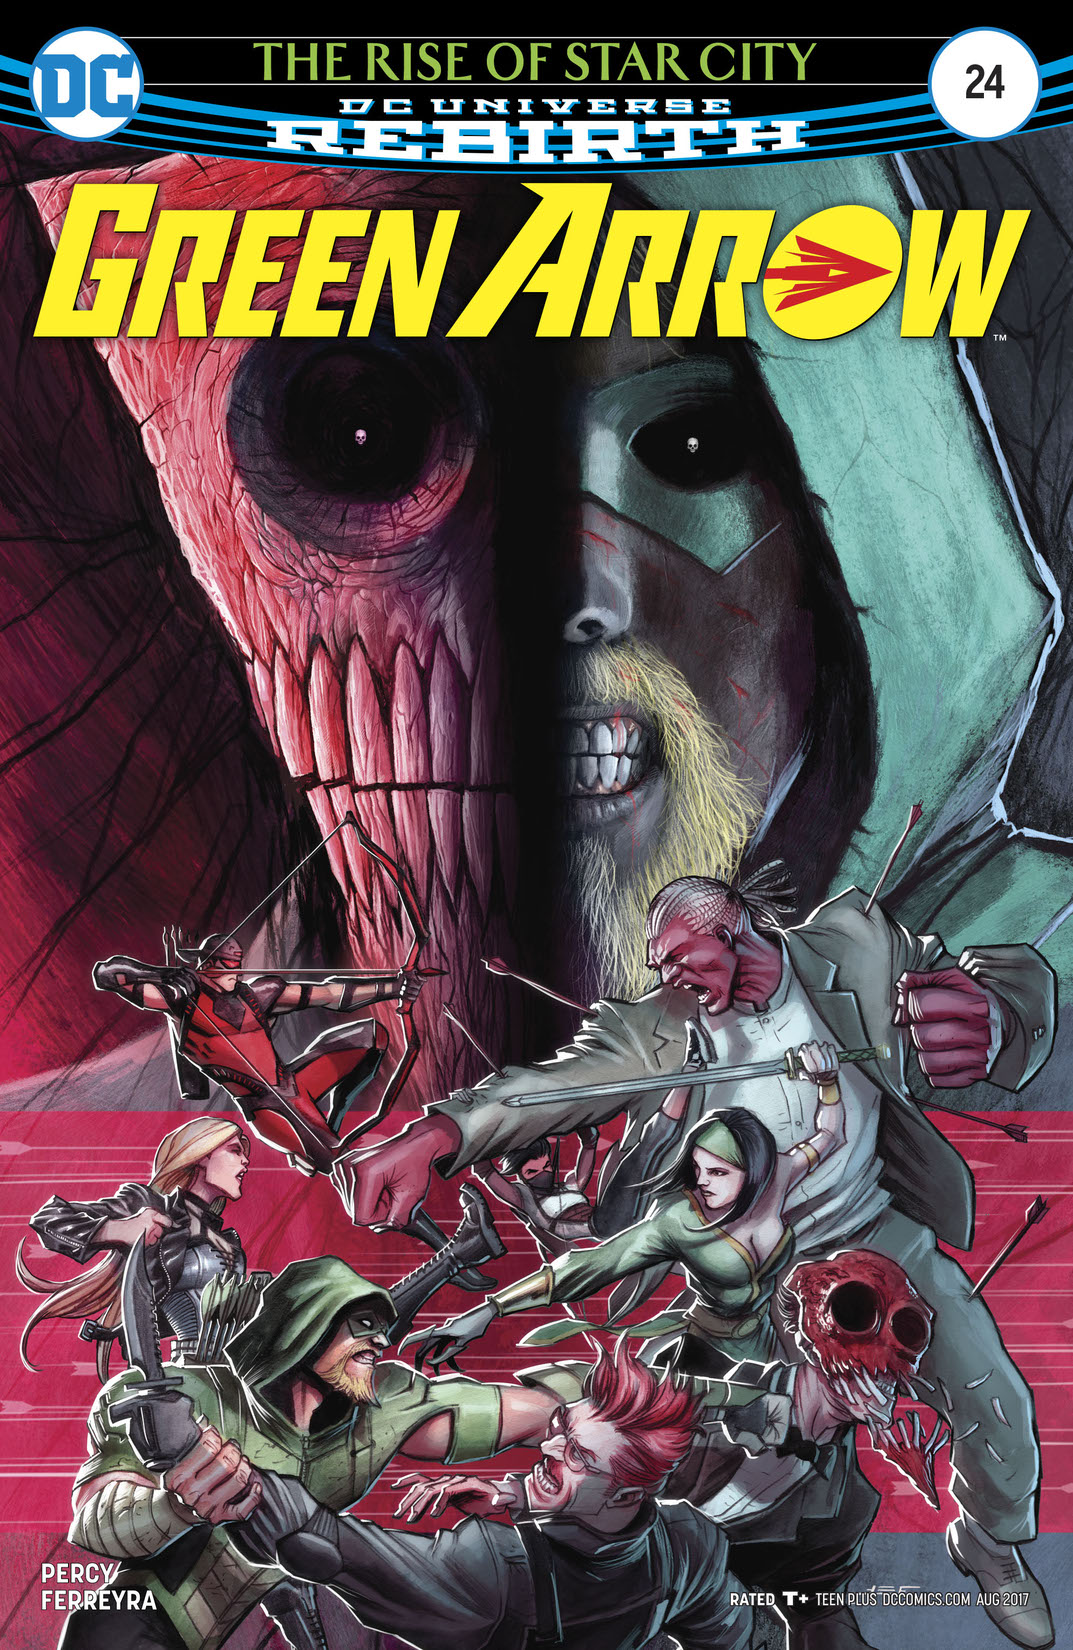 Green Arrow (2016-) #24 preview images